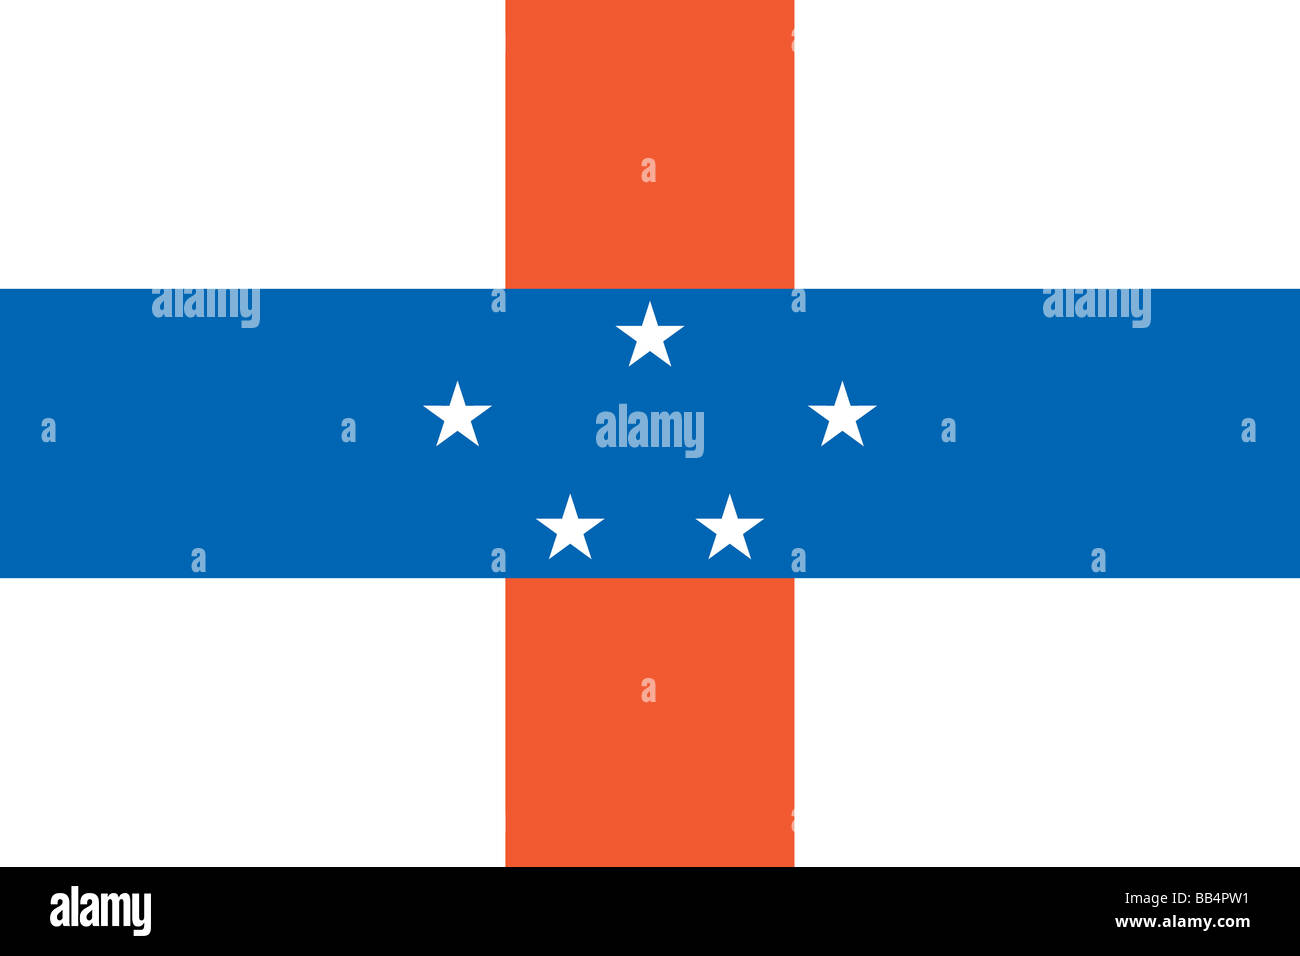 Flag of Netherlands Antilles, five islands in the Caribbean Sea, an autonomous part of the Kingdom of The Netherlands. Stock Photo